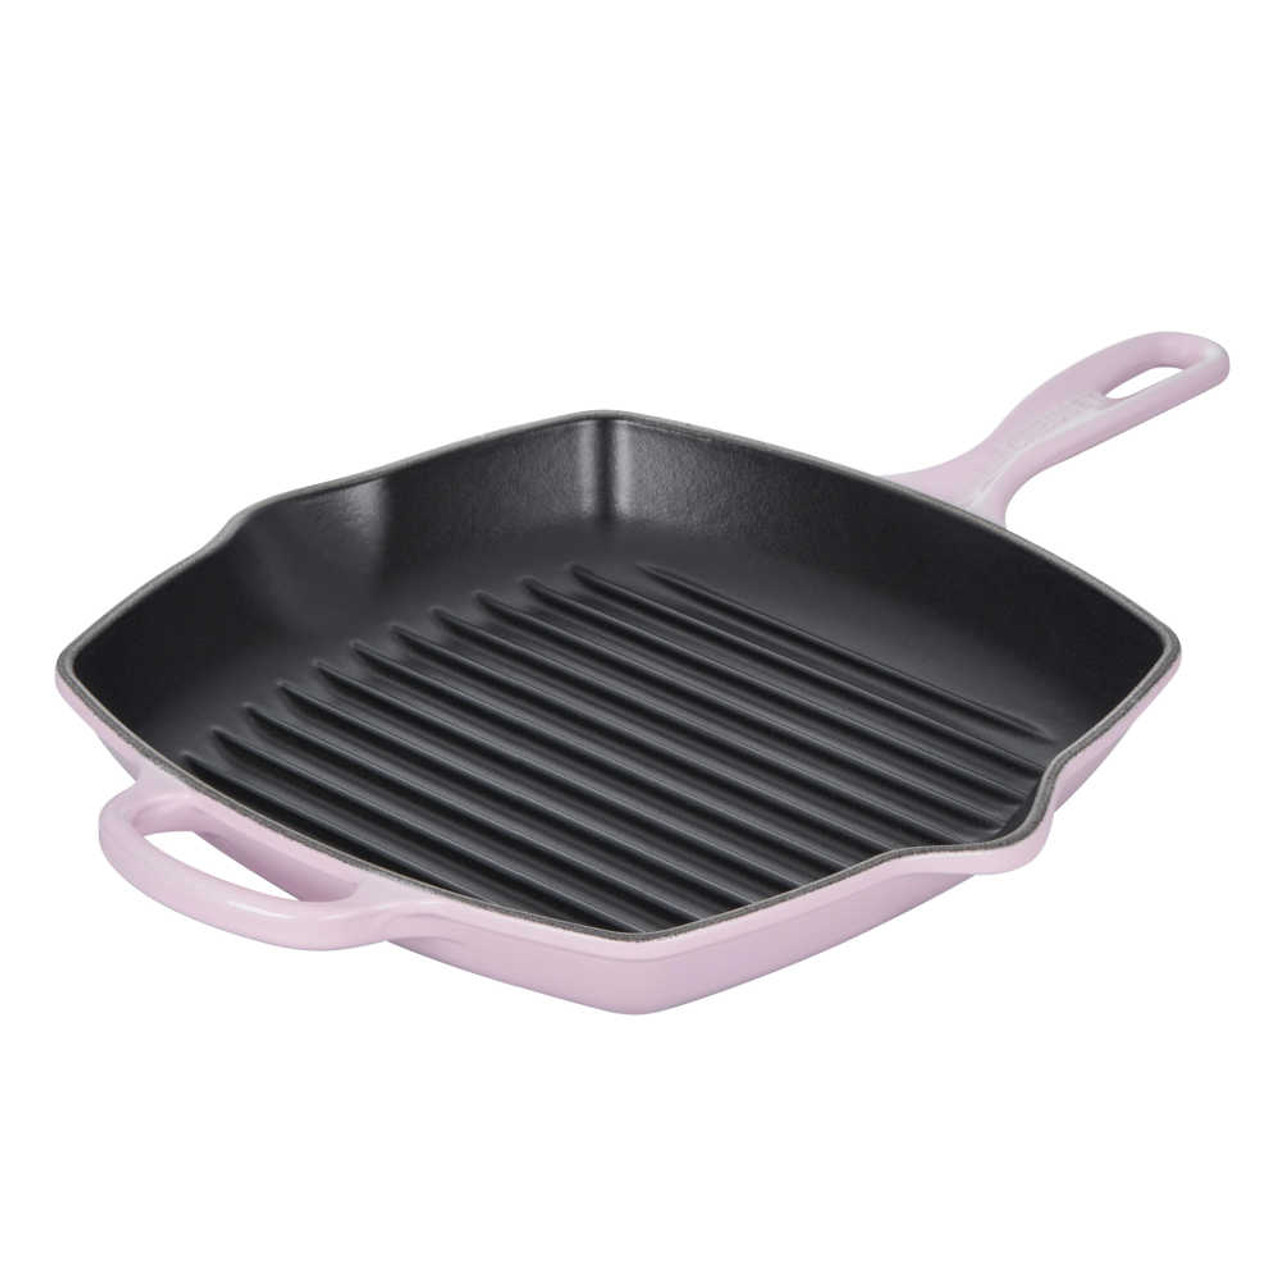 Le Creuset Cast Iron Signature Square Skillet Grill in Shallot